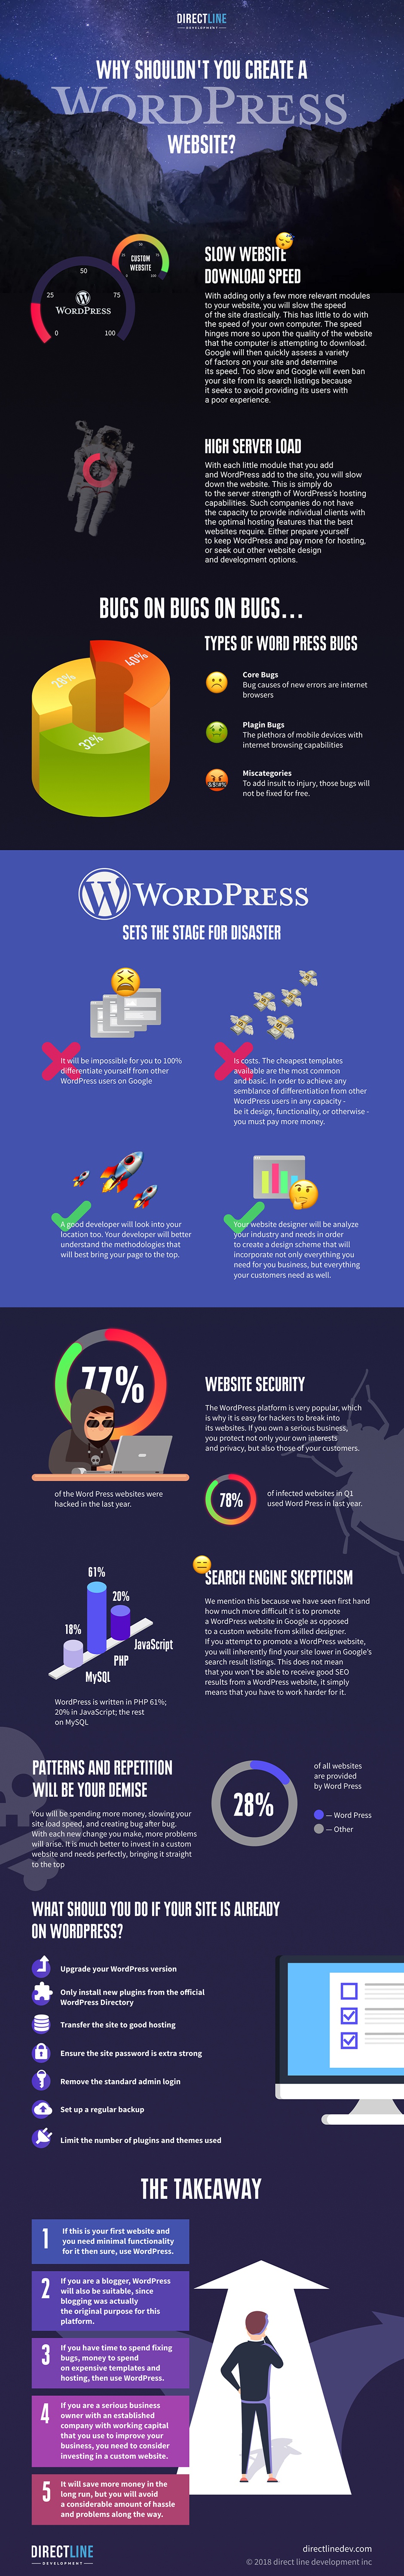 infographics Why Shouldn’t You Create A WordPress Website?